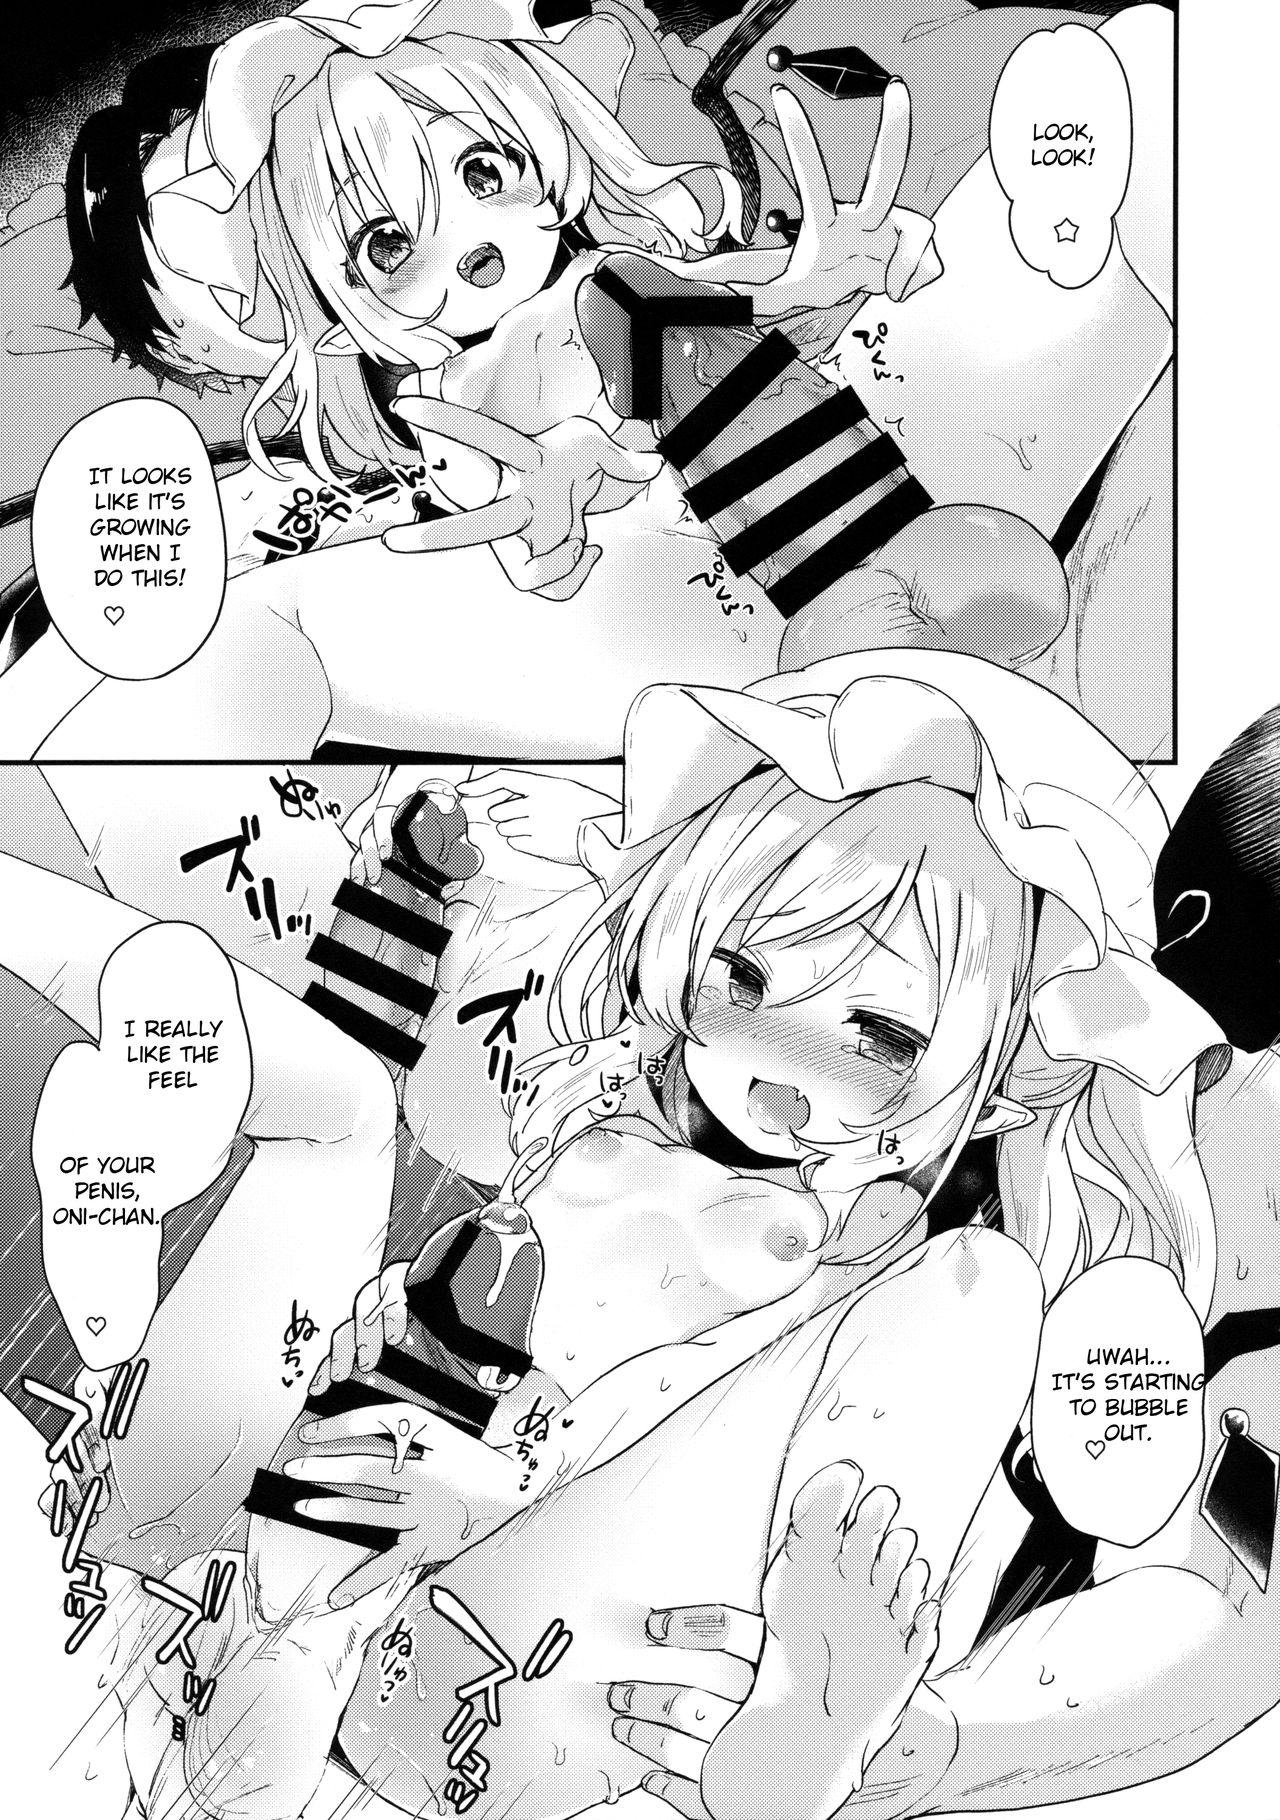 Women Sucking Dicks FLANEX - Touhou project Hot - Page 6